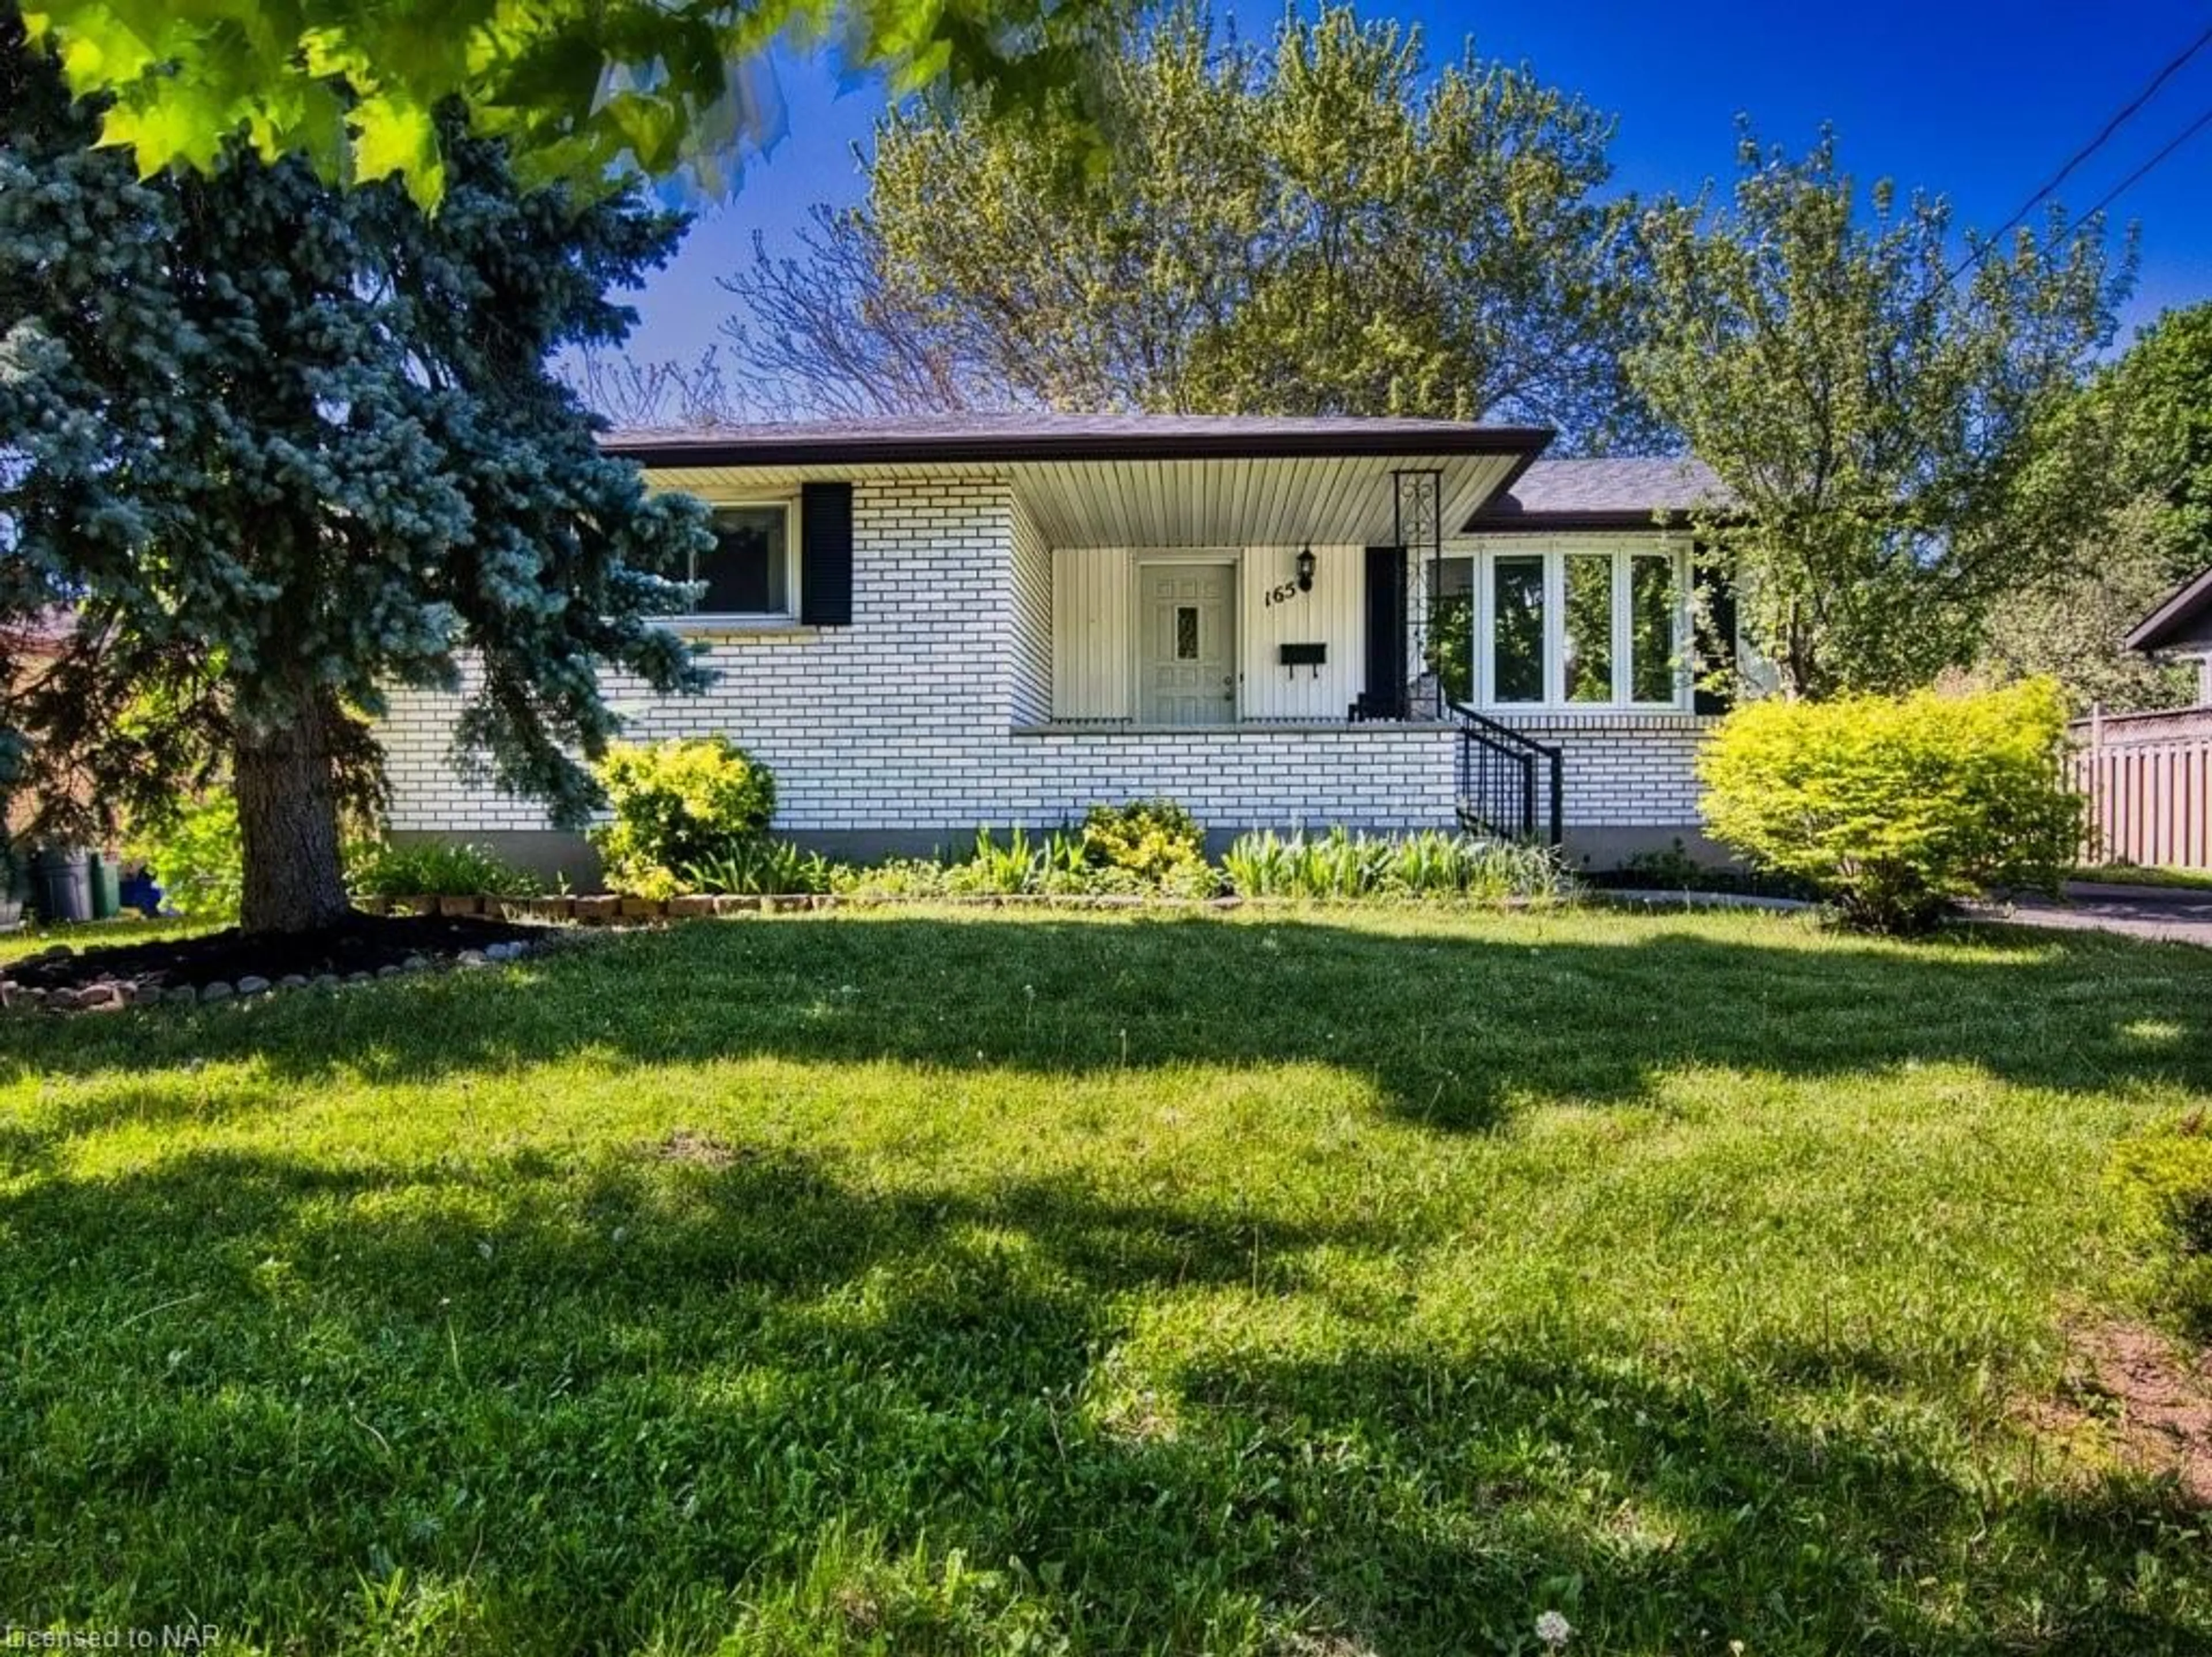 Cottage for 165 Linwell Rd, St. Catharines Ontario L2N 1R8